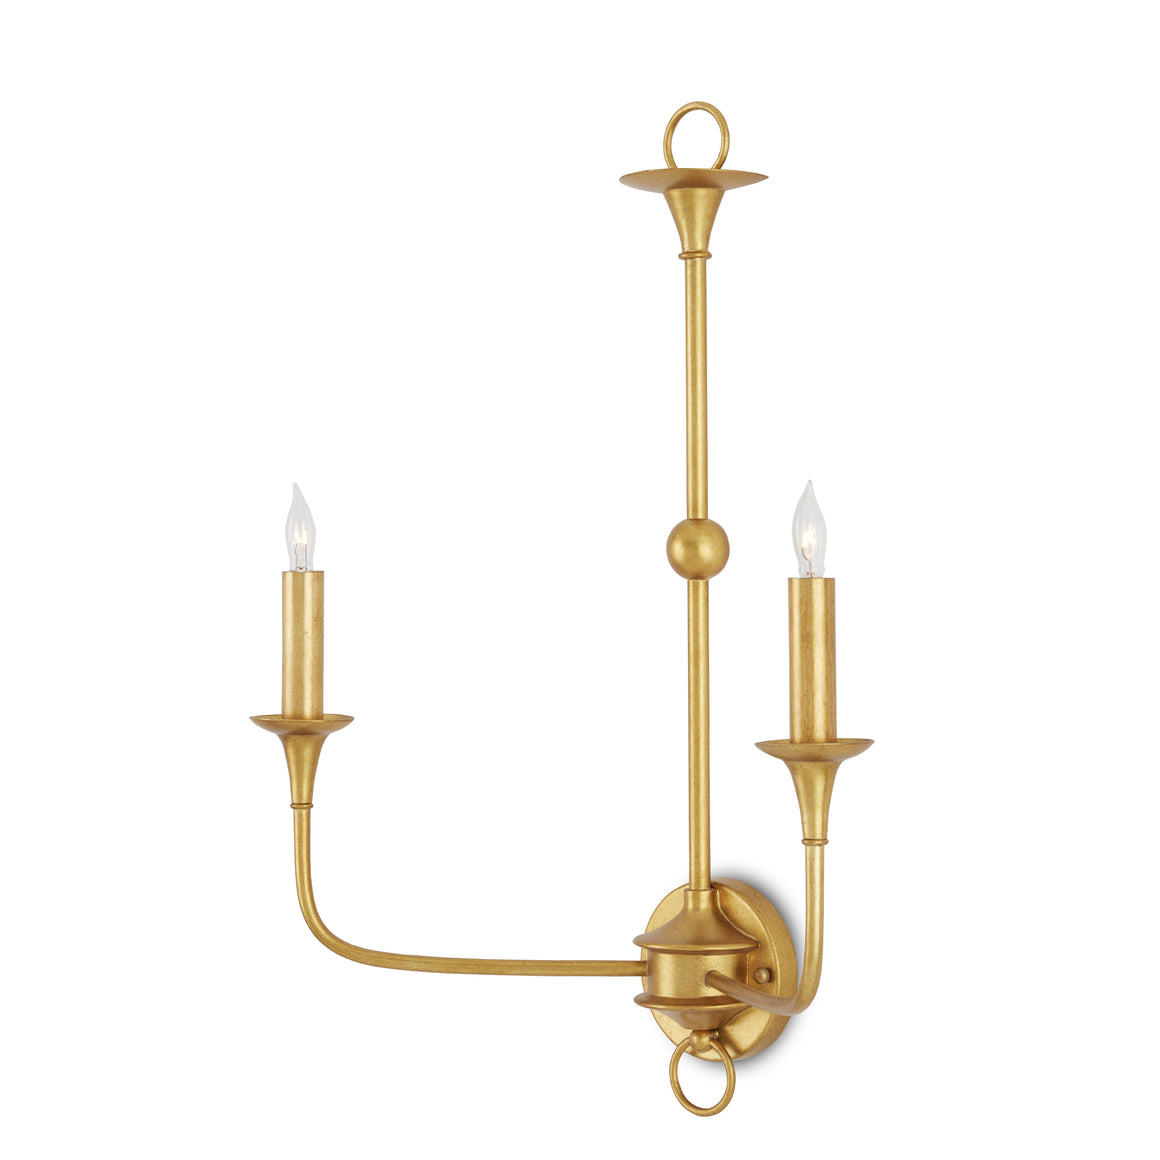 Nottaway Gold Large Wall Sconce